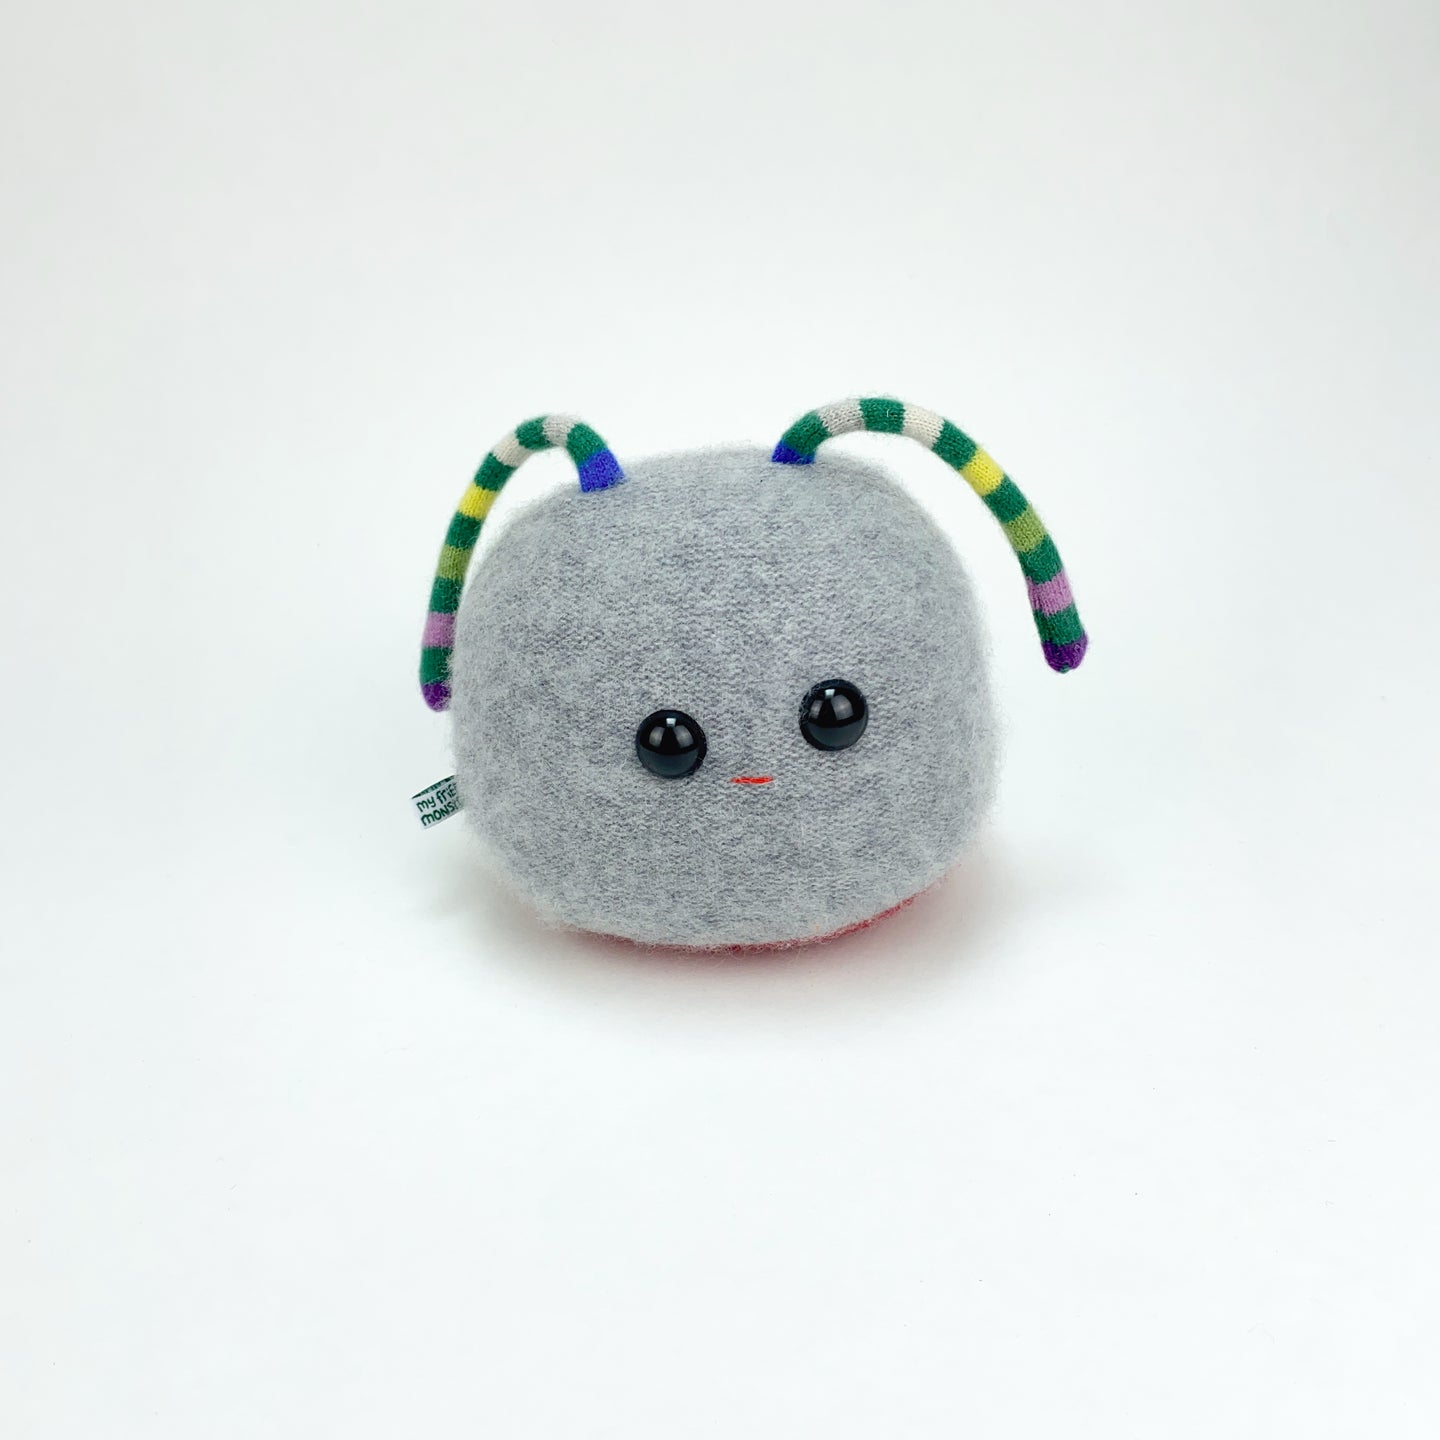 Buttons the adorable my friend monster™ stuffie